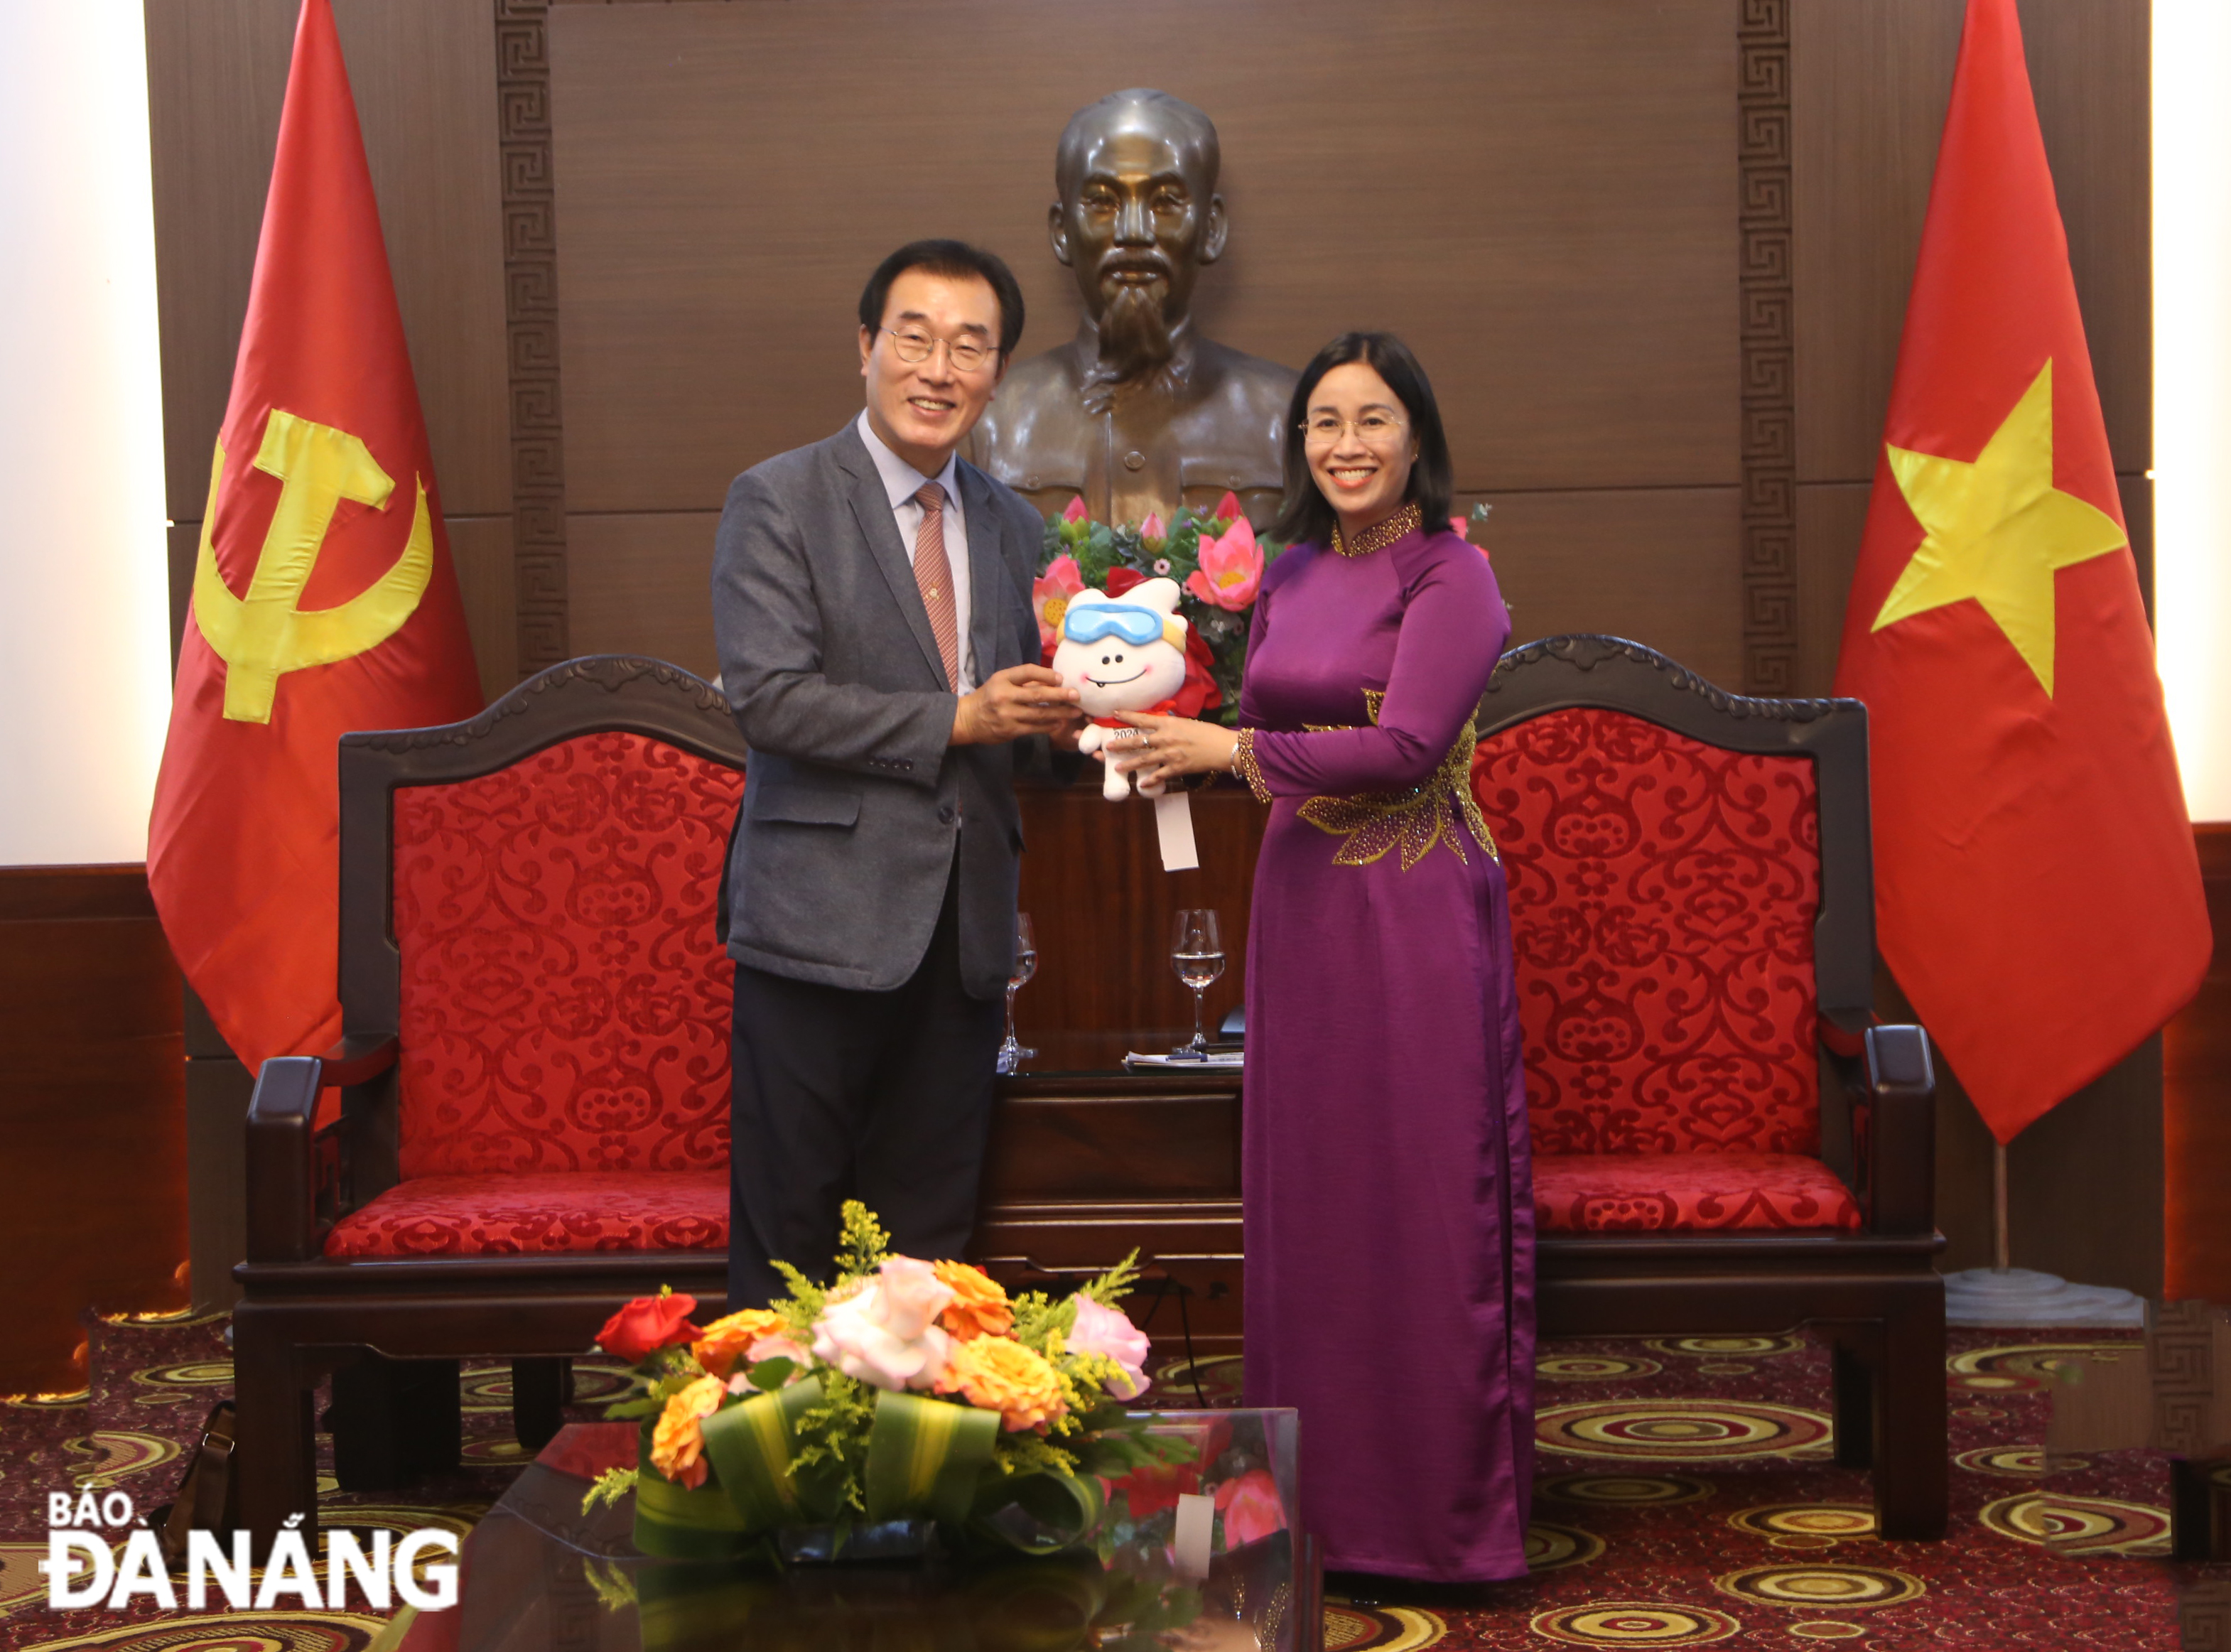 Vice Chairwoman of the Da Nang People's Council Nguyen Thi Anh Thi (right) receiving a gift from Mr. Jeong Jae Woong who is Head of the Department of Culture and Society of the People's Council of Gangwon Special Self-Governing Province 